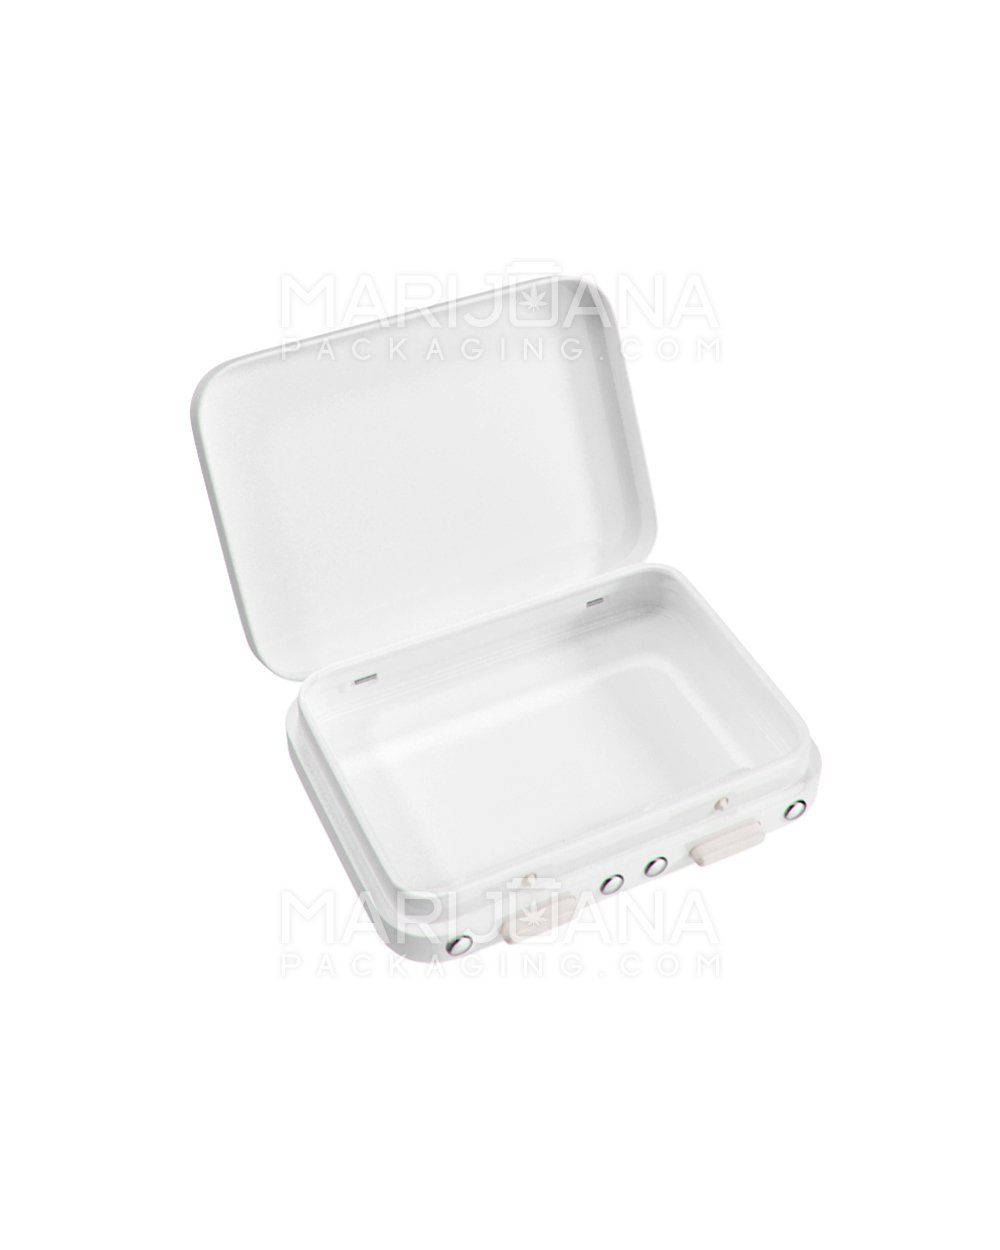 Custom 100% Recyclable Child Resistant Hinged-Lid Mini Pack Joint Box | 80mm x 61.5mm - White Tin - 2